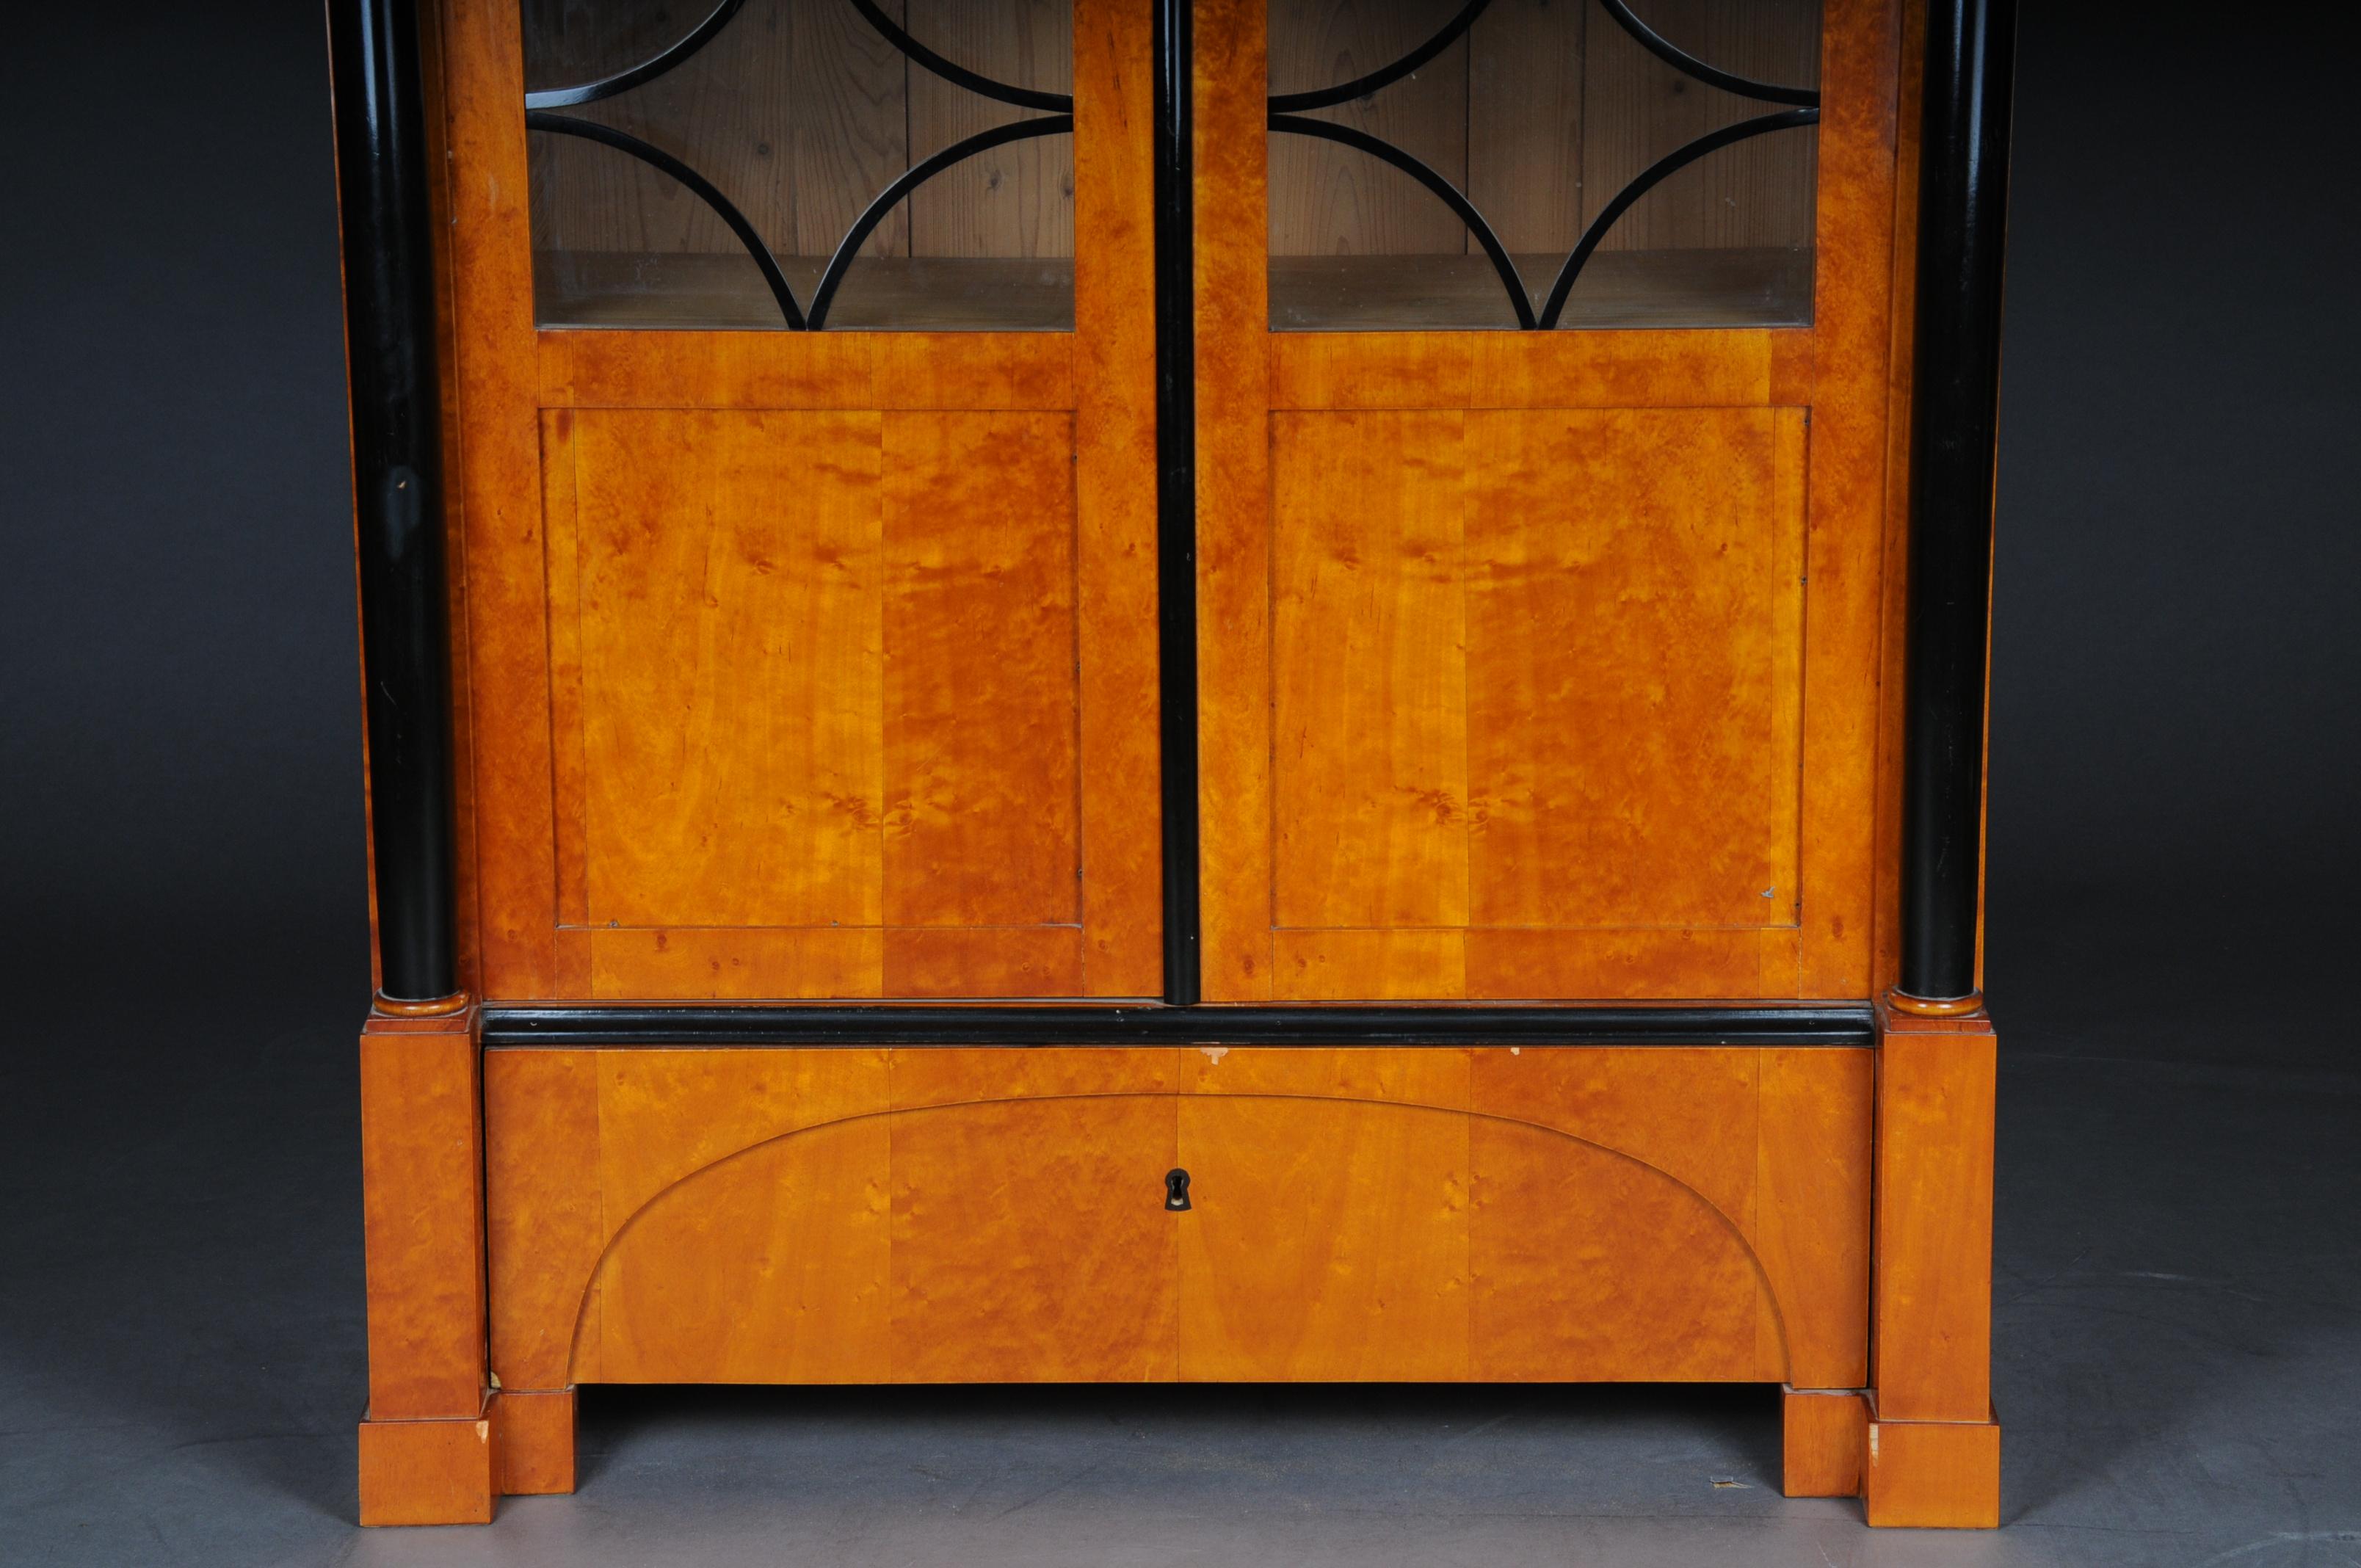 Beautiful Biedermeier showcase or bookcase, 20th century, cherrywood

Cherrywood veneer on solid softwood. Rectangular two-door corpus on block feet with partially framed transom glazing. Architecturally structured front with flanking and ebonized